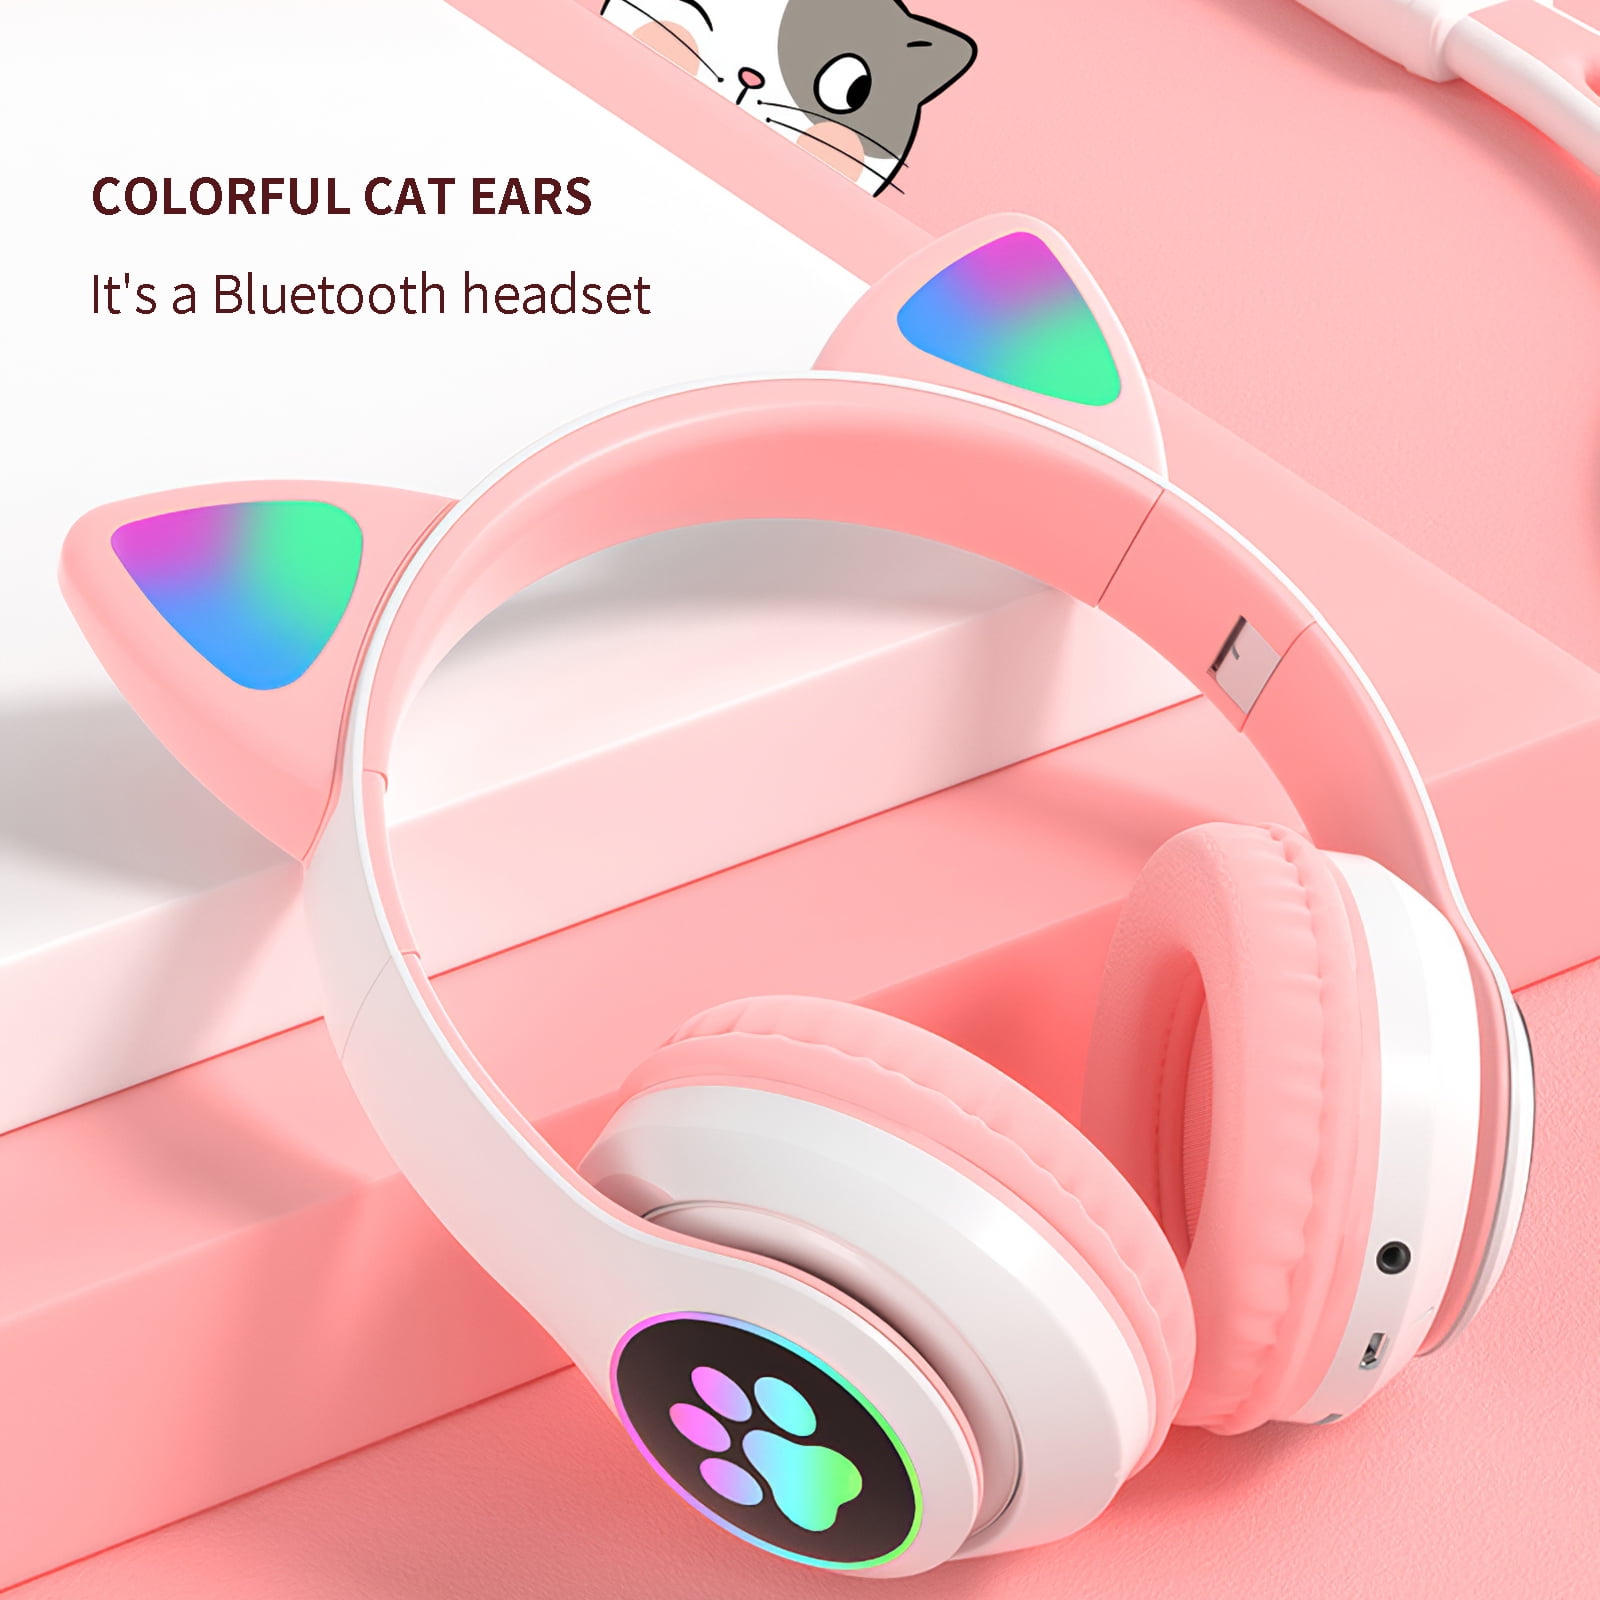 Bluetooth 5.0 Wireless Gaming Headset Cute Cat Ear Headphones with Noise Canceling Mic LED Light for Kids Adult Jingtaihua Gaming Headset